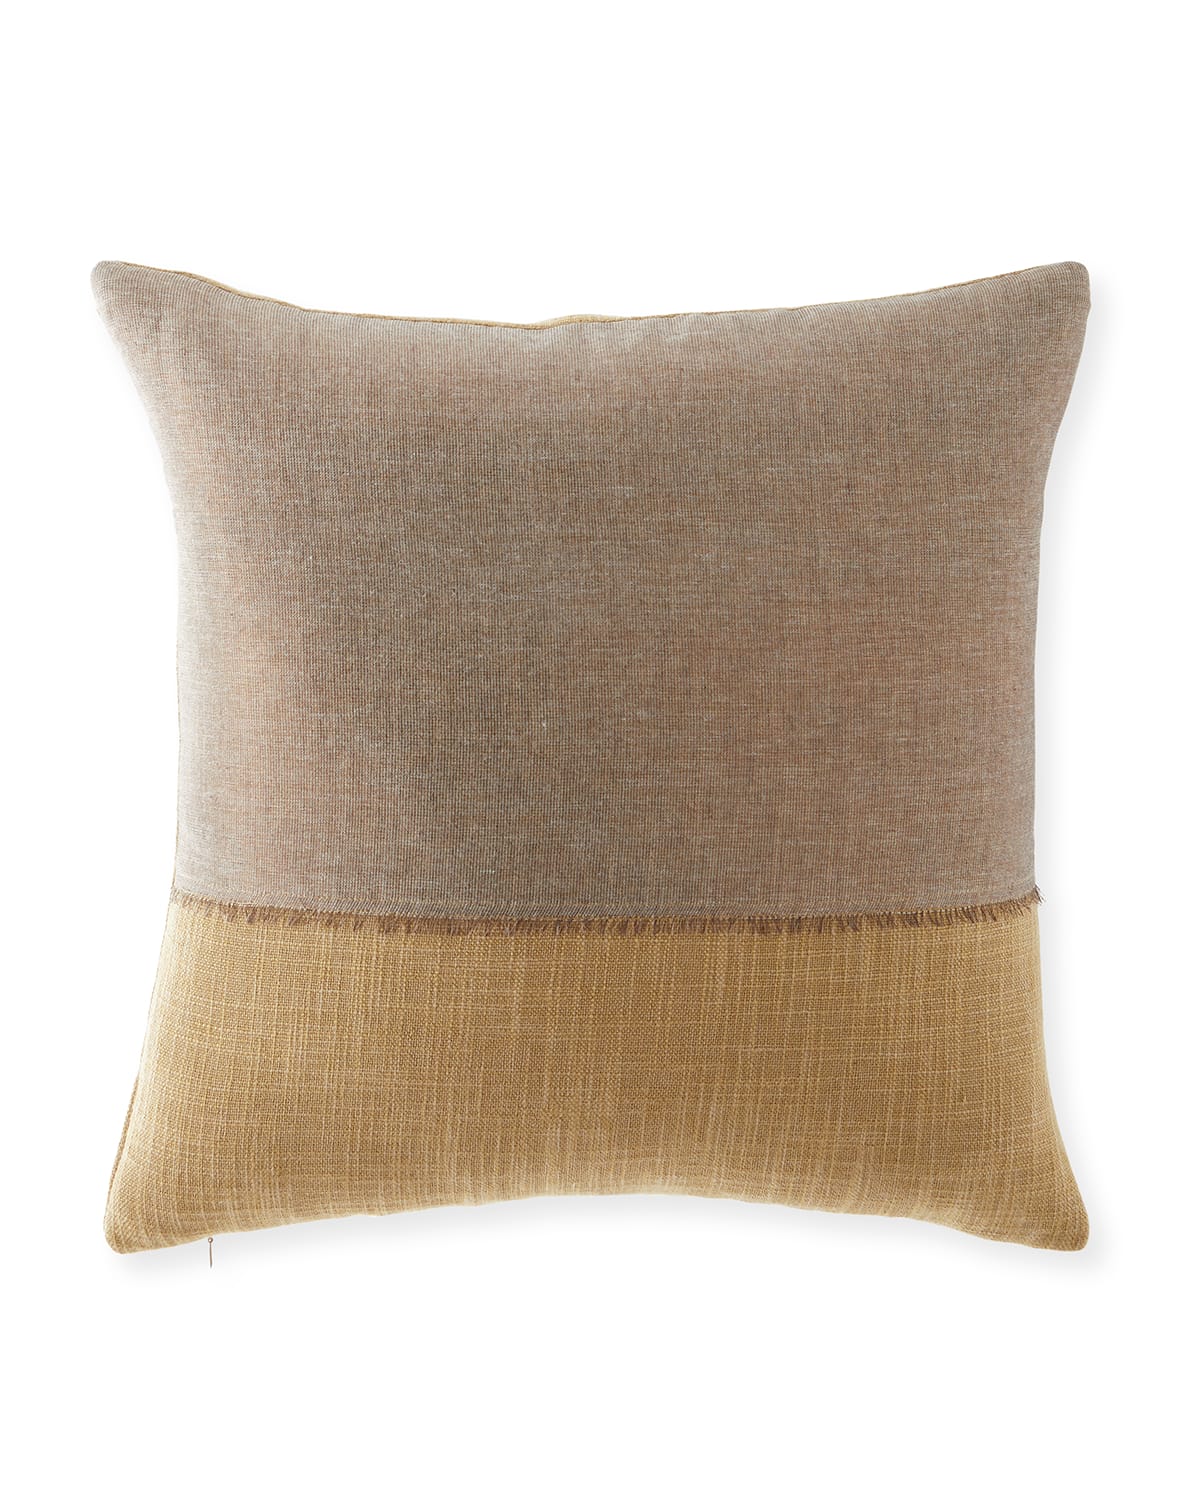 Tl At Home Barrington Honey Alannis Pillow, 22"sq. In Brown